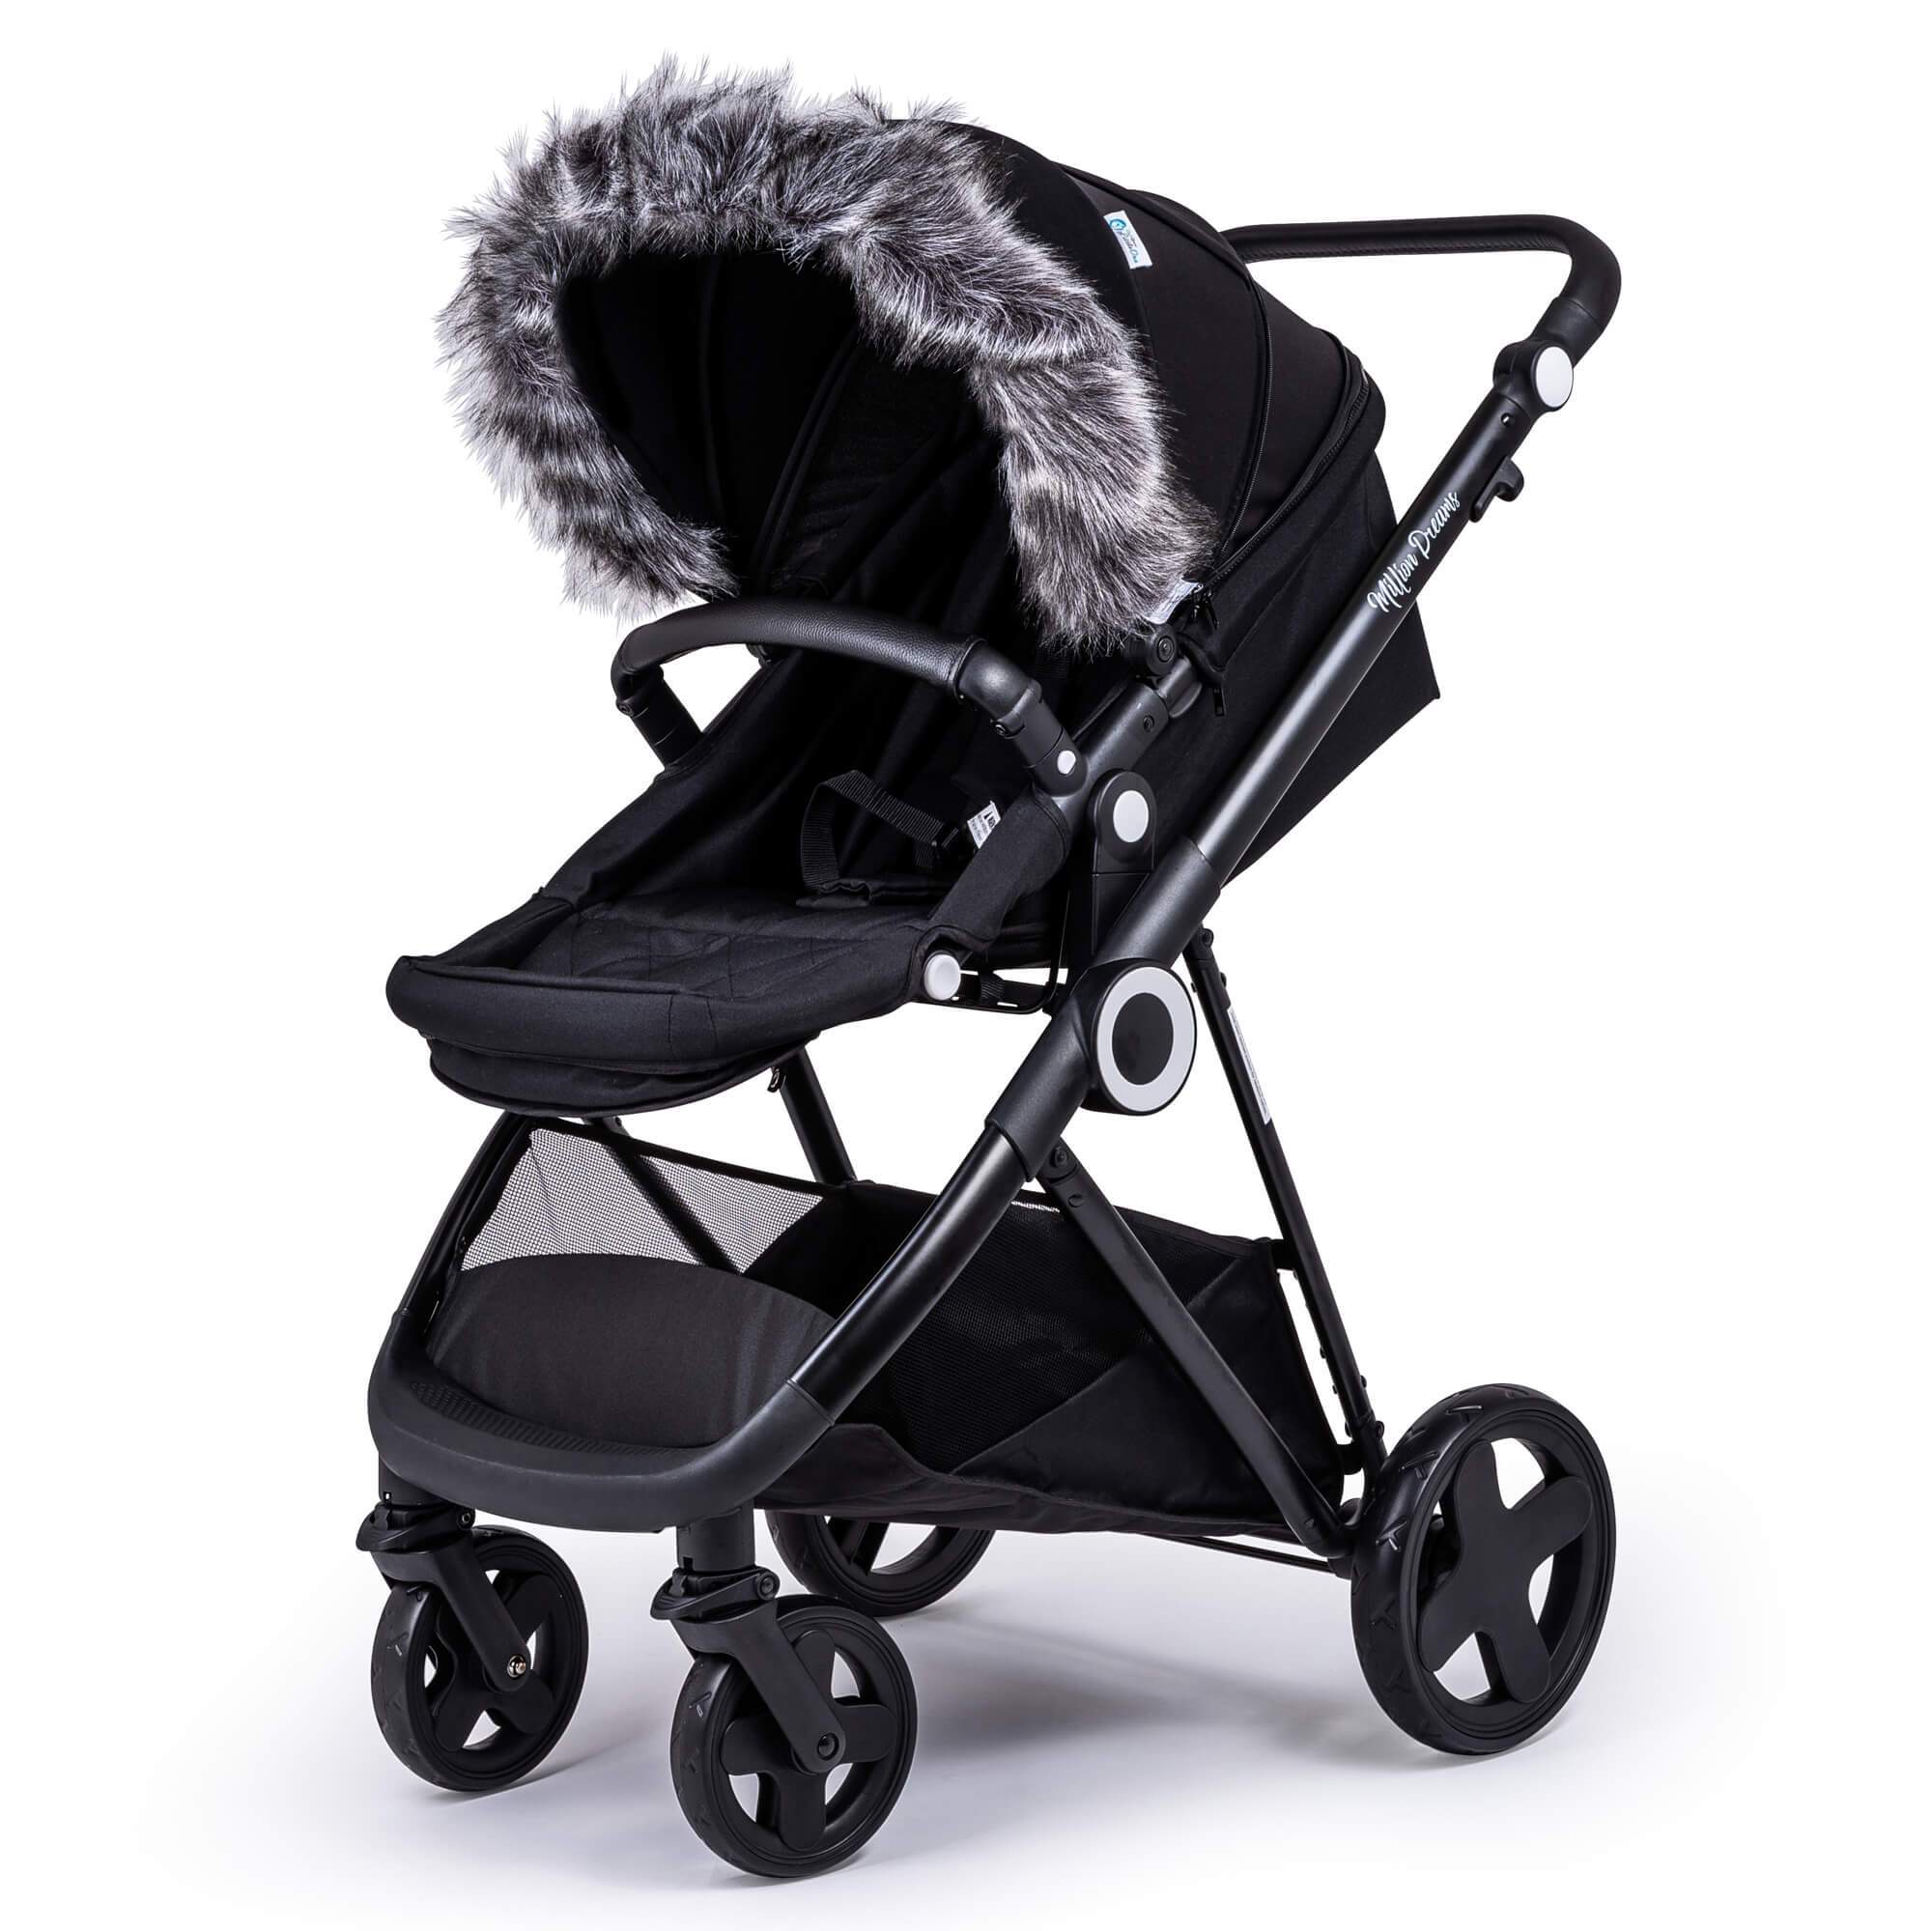 Pram Fur Hood Trim Attachment for Pushchair Compatible with Zooper - Dark Grey / Fits All Models | For Your Little One